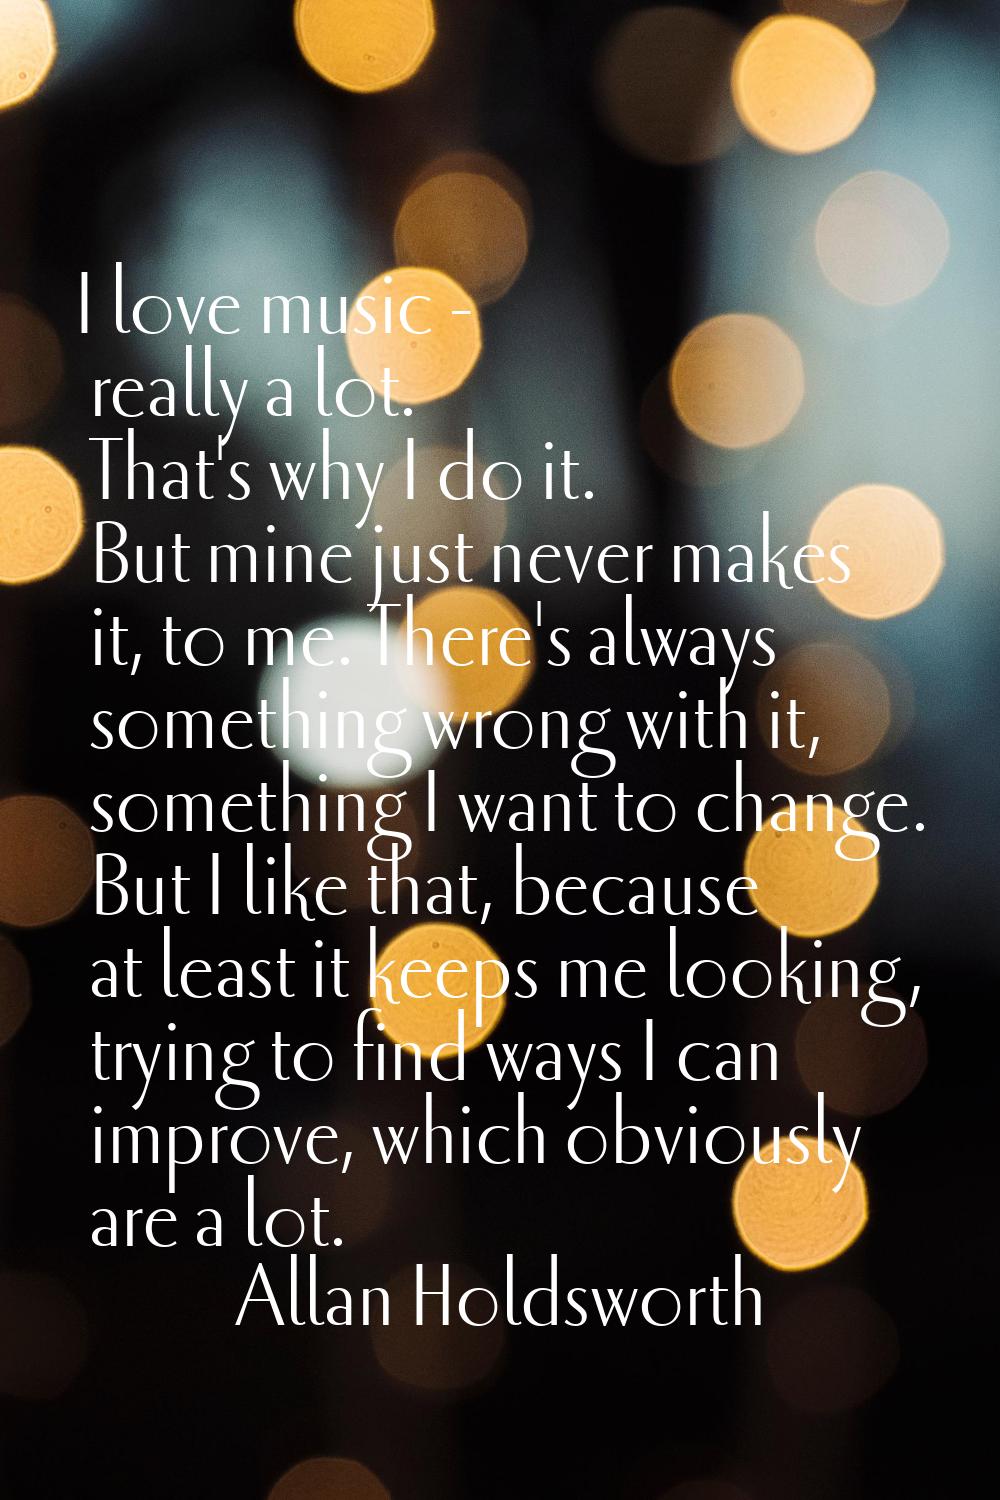 I love music - really a lot. That's why I do it. But mine just never makes it, to me. There's alway